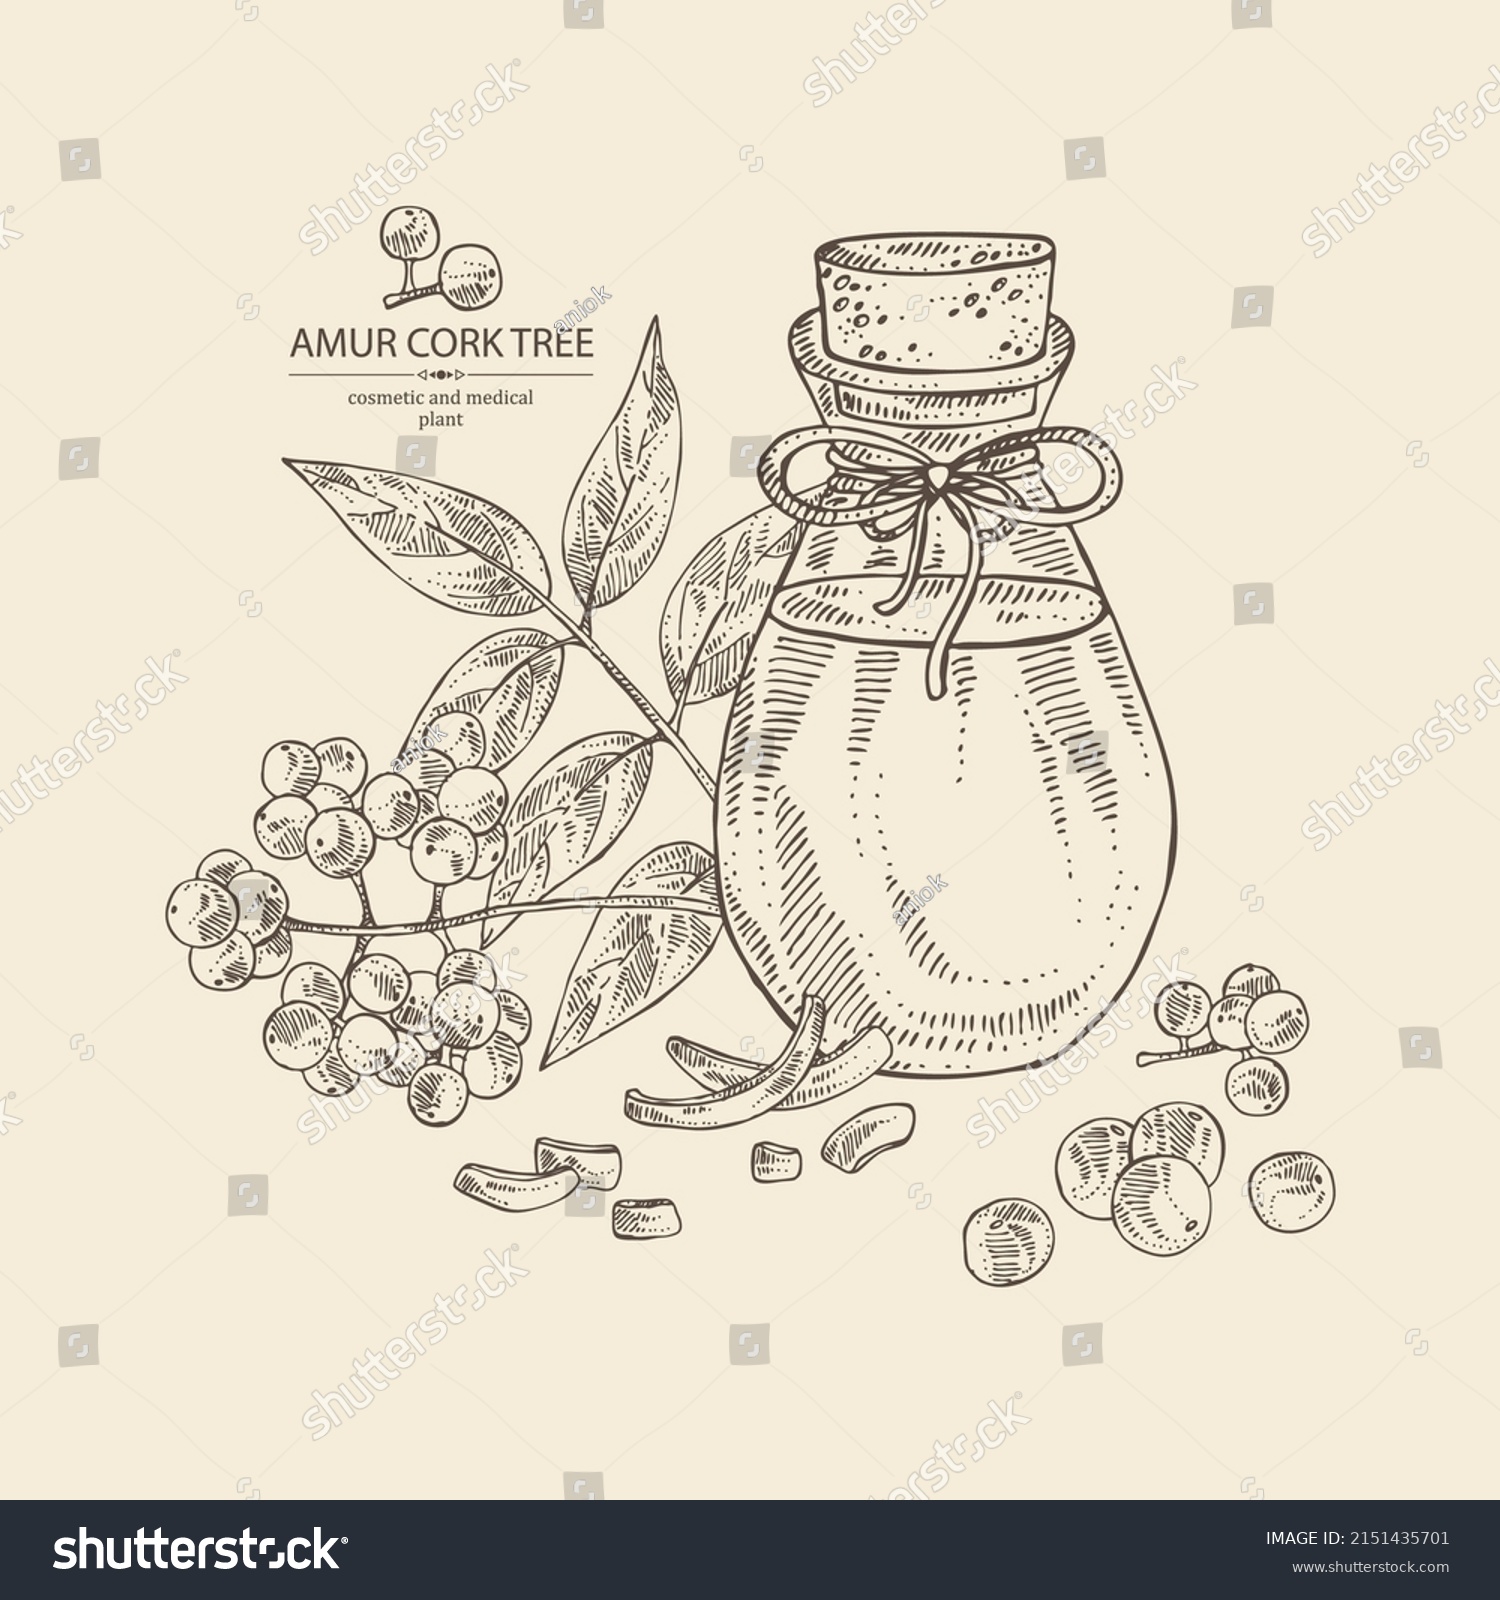 SVG of Background with amur cork tree: berries, plant, amur cork tree bark and bottle of amur cork tree oil. Phellodendron amurense.  Cosmetic, perfumery and medical plant. svg